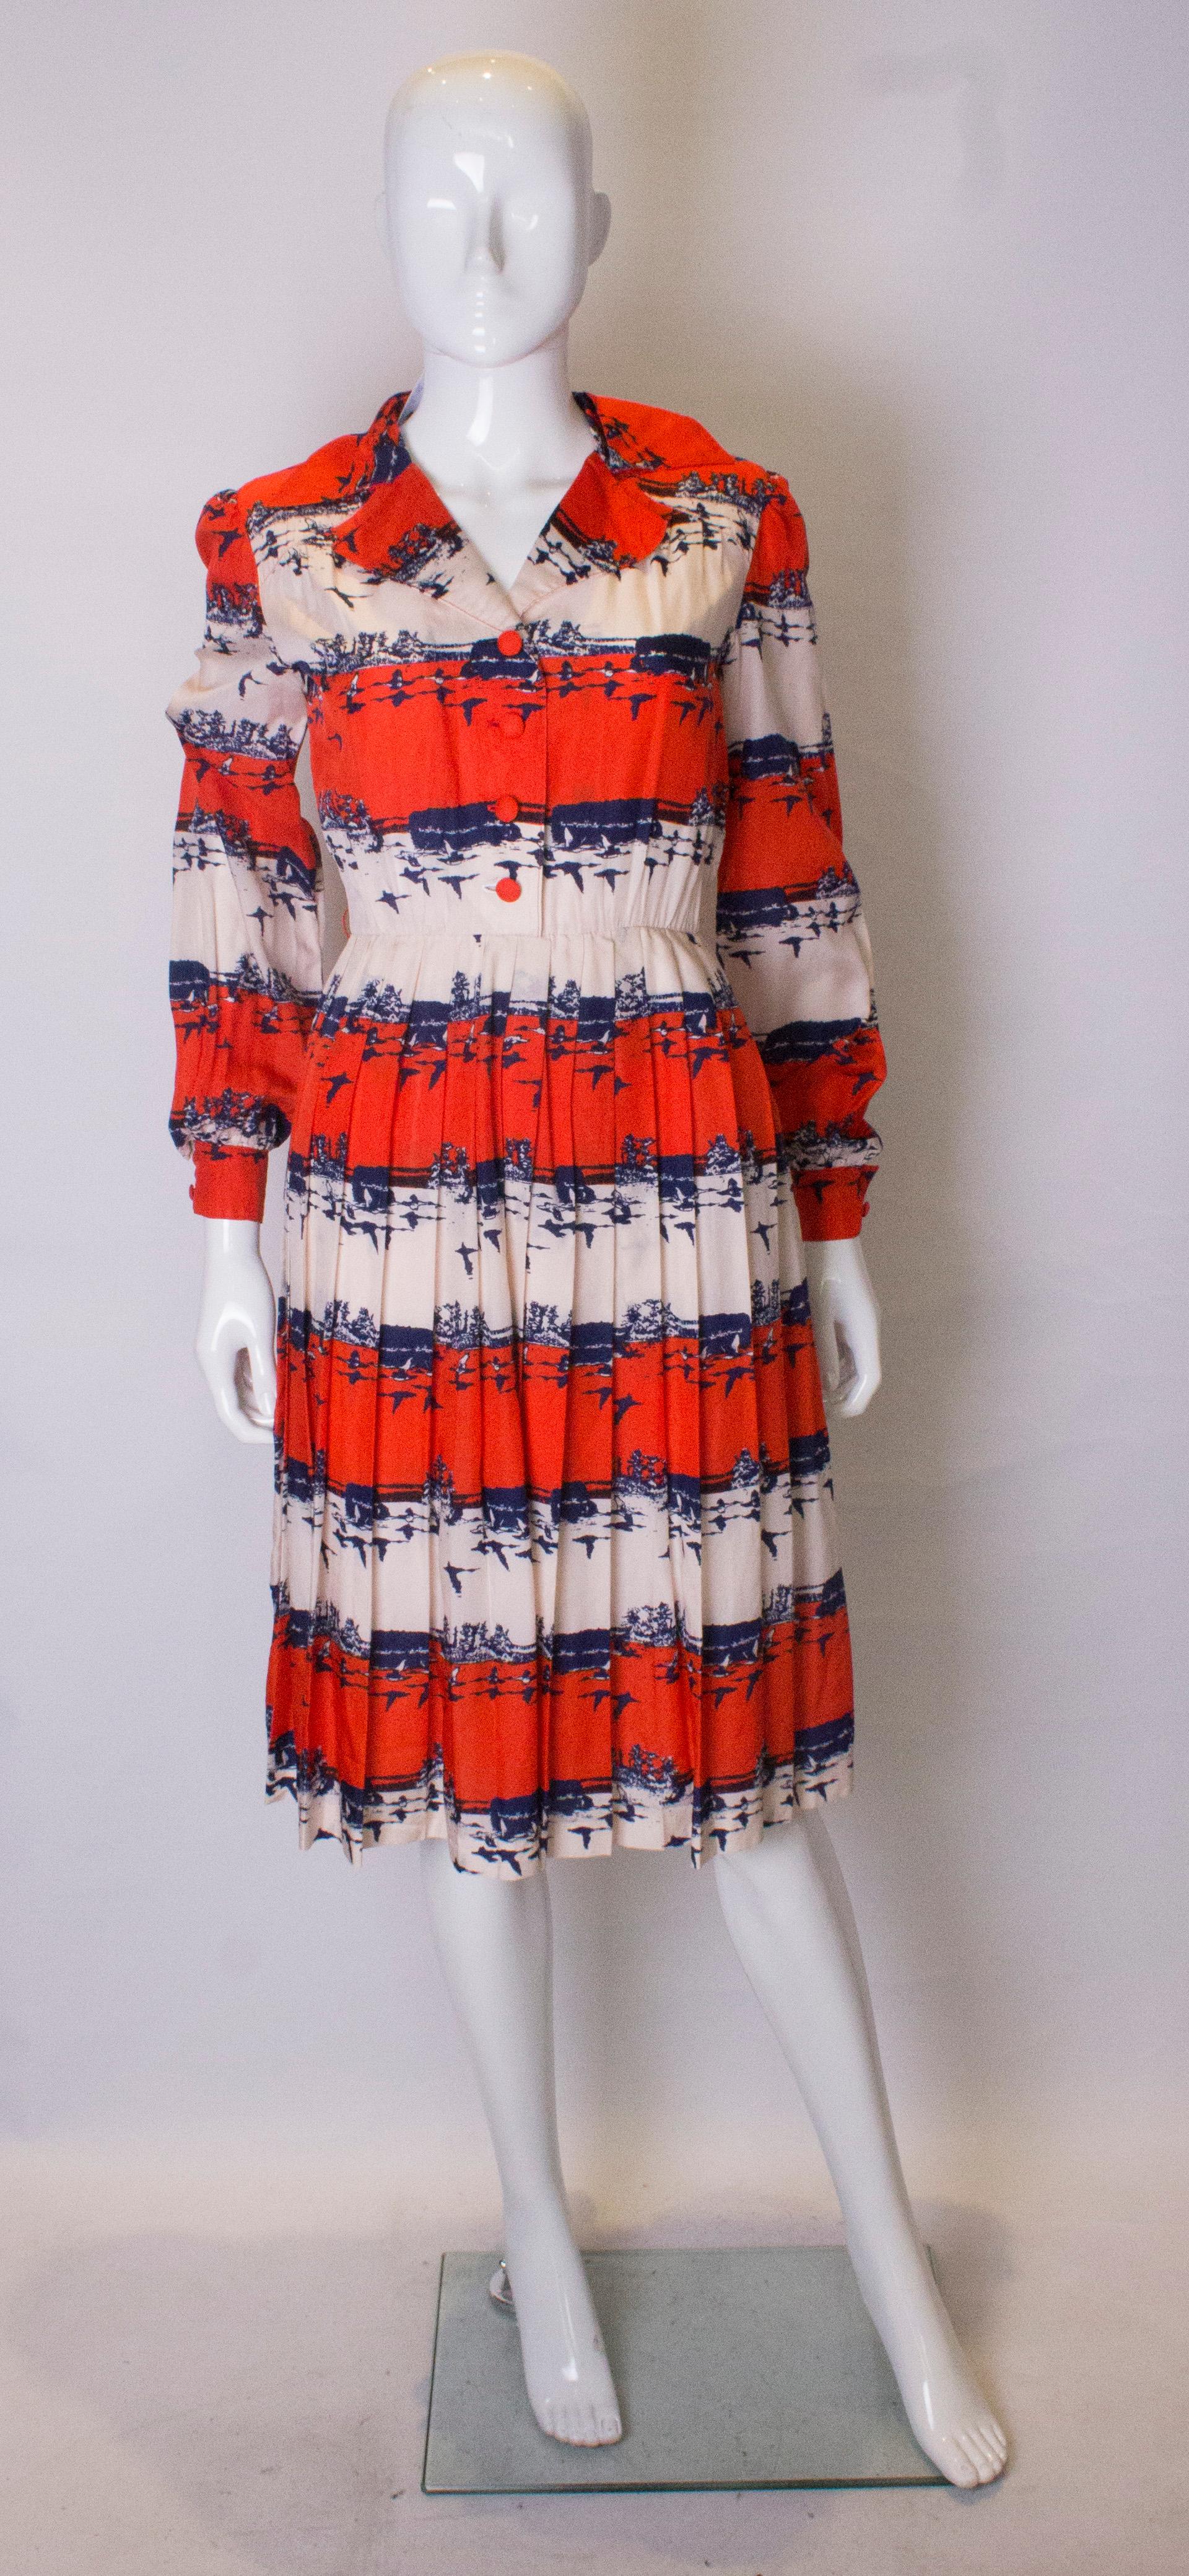 A chic, shirt dress in a red, white and blue bird print. The dress has fabric covered buttons, a popper opening at the side  and is fully lined.